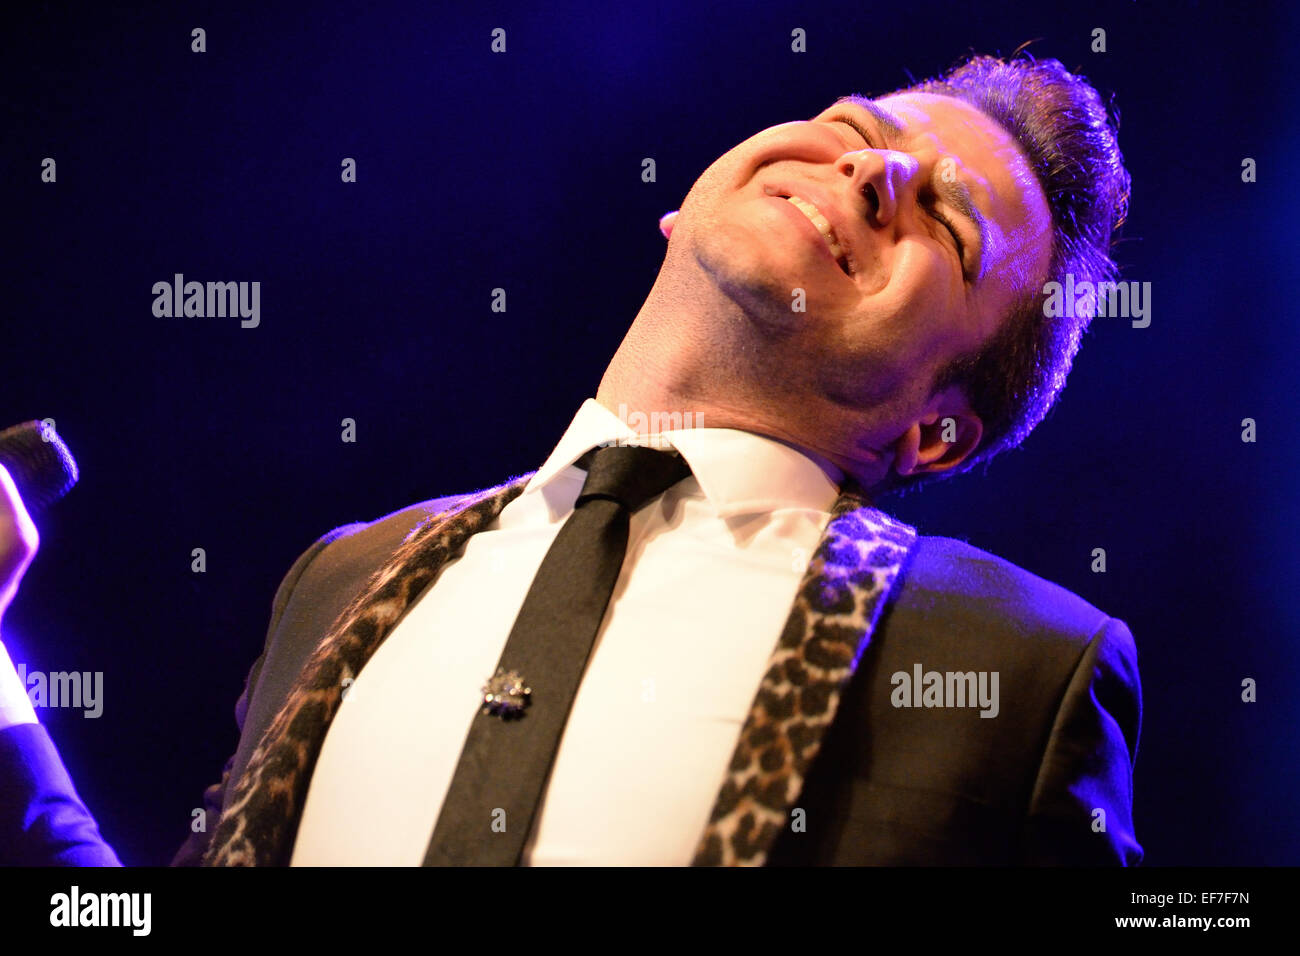 BARCELONA - MAY 15: Eli Paperboy Reed, American singer and songwriter, performs at Barts stage. Stock Photo